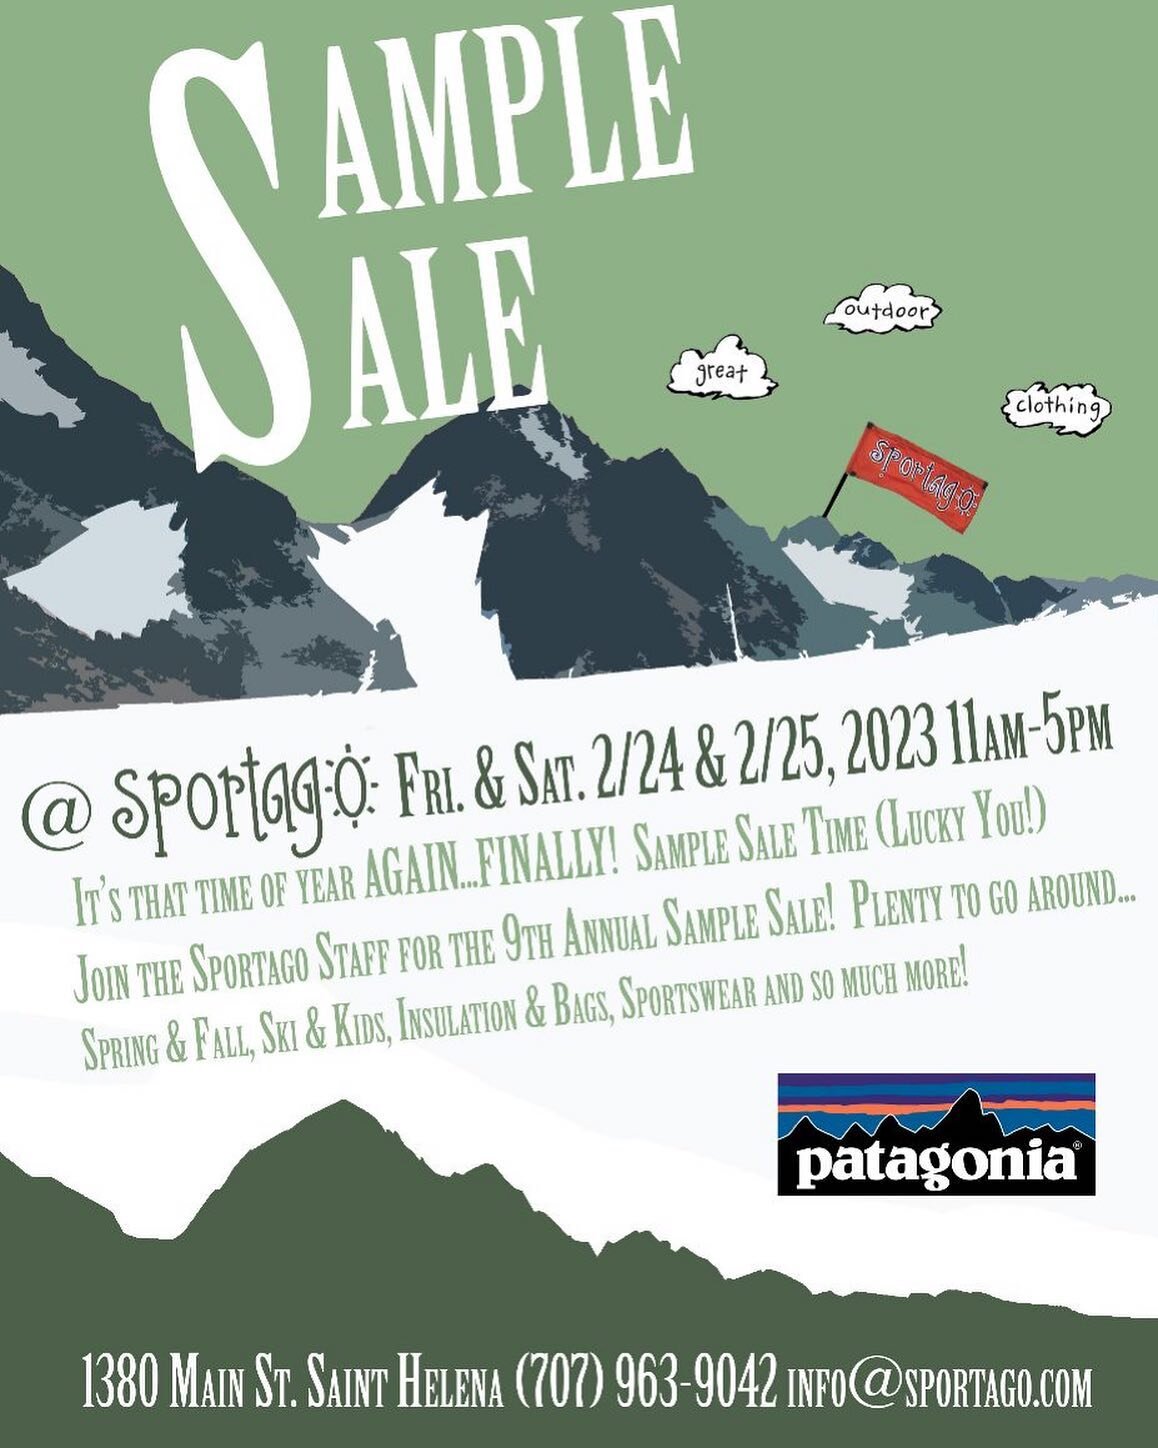 Sample Sale Time!  See you on Friday 2/24 and Saturday 2/25 for some great deals on all things Patagonia! 
Patagonia Samples are usually Men&rsquo;s Mediums and Women&rsquo;s Smalls, but we will have many more extended sizes for all including kids, l